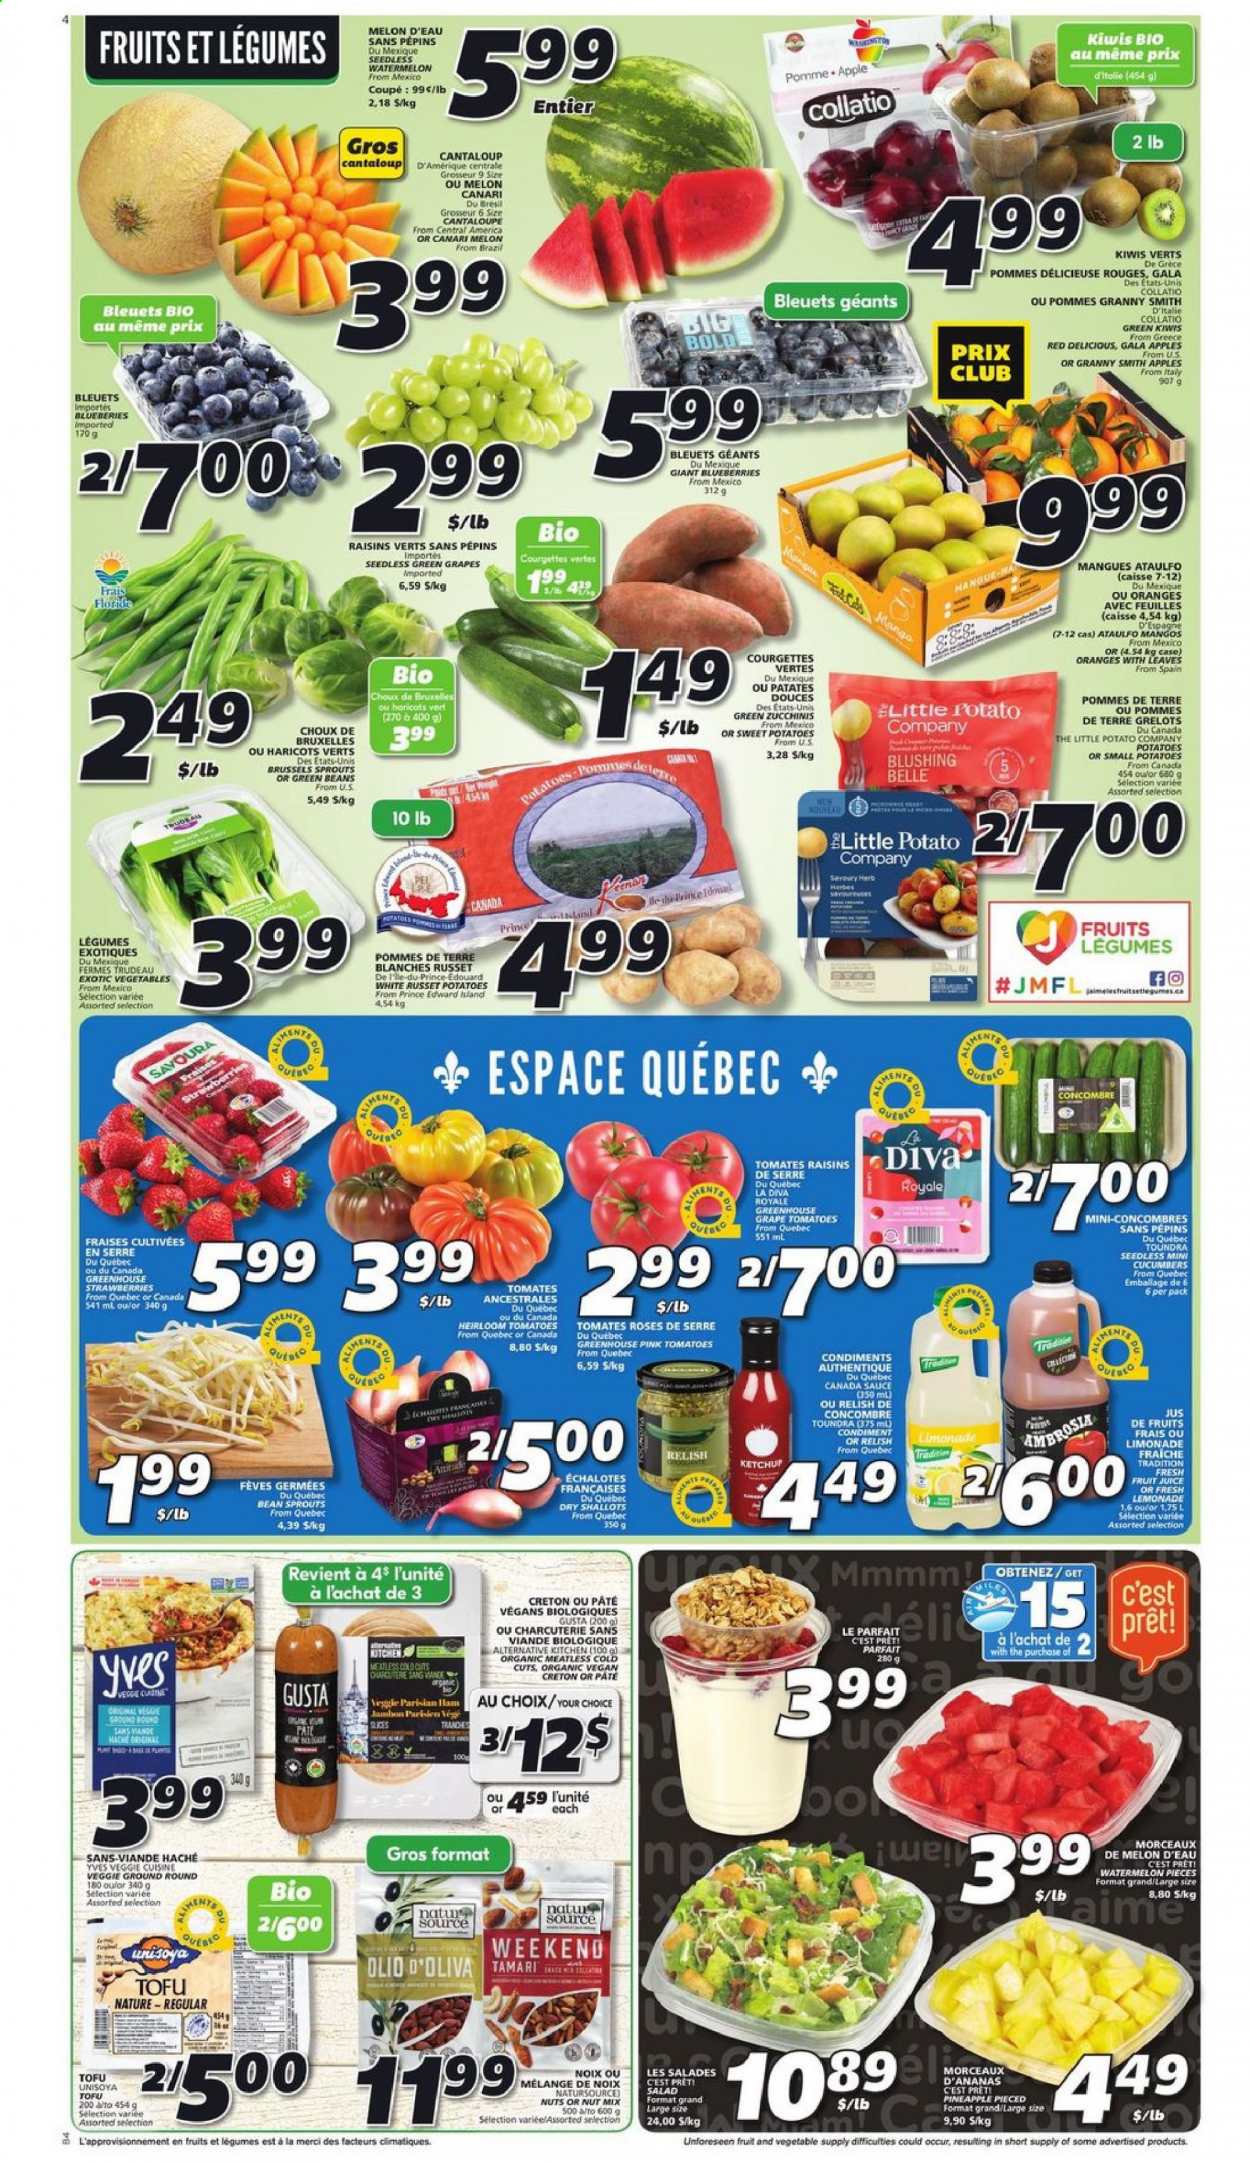 thumbnail - IGA Flyer - April 15, 2021 - April 21, 2021 - Sales products - beans, cantaloupe, cucumber, green beans, russet potatoes, shallots, sweet potato, tomatoes, potatoes, salad, bean sprouts, brussel sprouts, apples, blueberries, Gala, Red Delicious apples, strawberries, watermelon, pineapple, melons, Granny Smith, sauce, tofu, Merci, dried fruit, lemonade, juice, fruit juice, kiwi, raisins. Page 3.